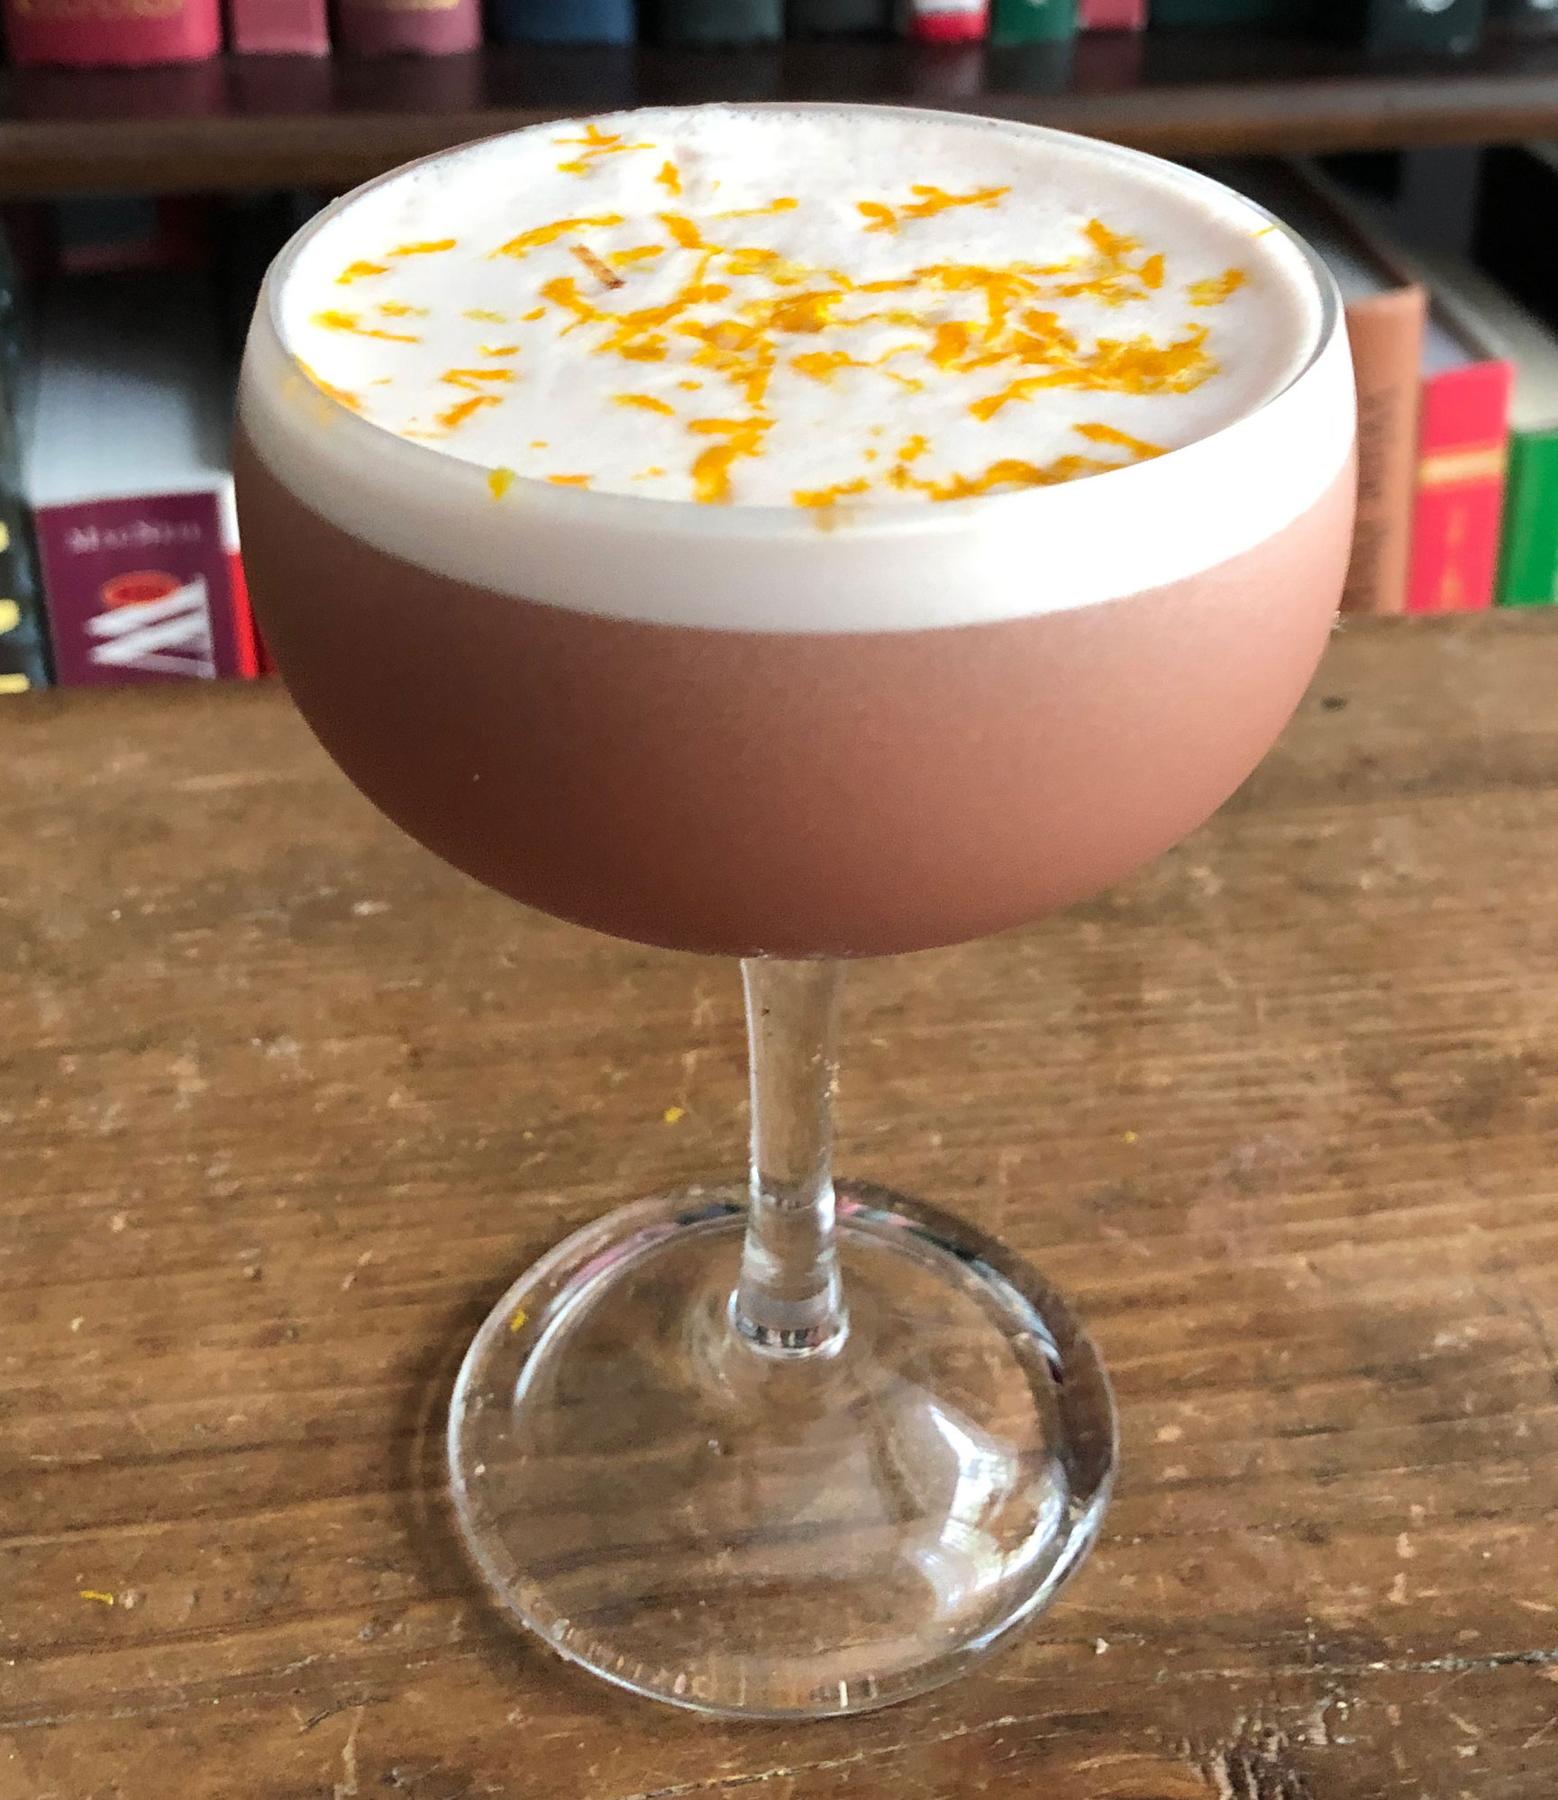 An example of the Damson Dove, the mixed drink (drink), by Dovetail, New York City, featuring Averell Damson Plum Gin Liqueur, egg white, lemon juice, simple syrup, and orange twist; photo by Lee Edwards